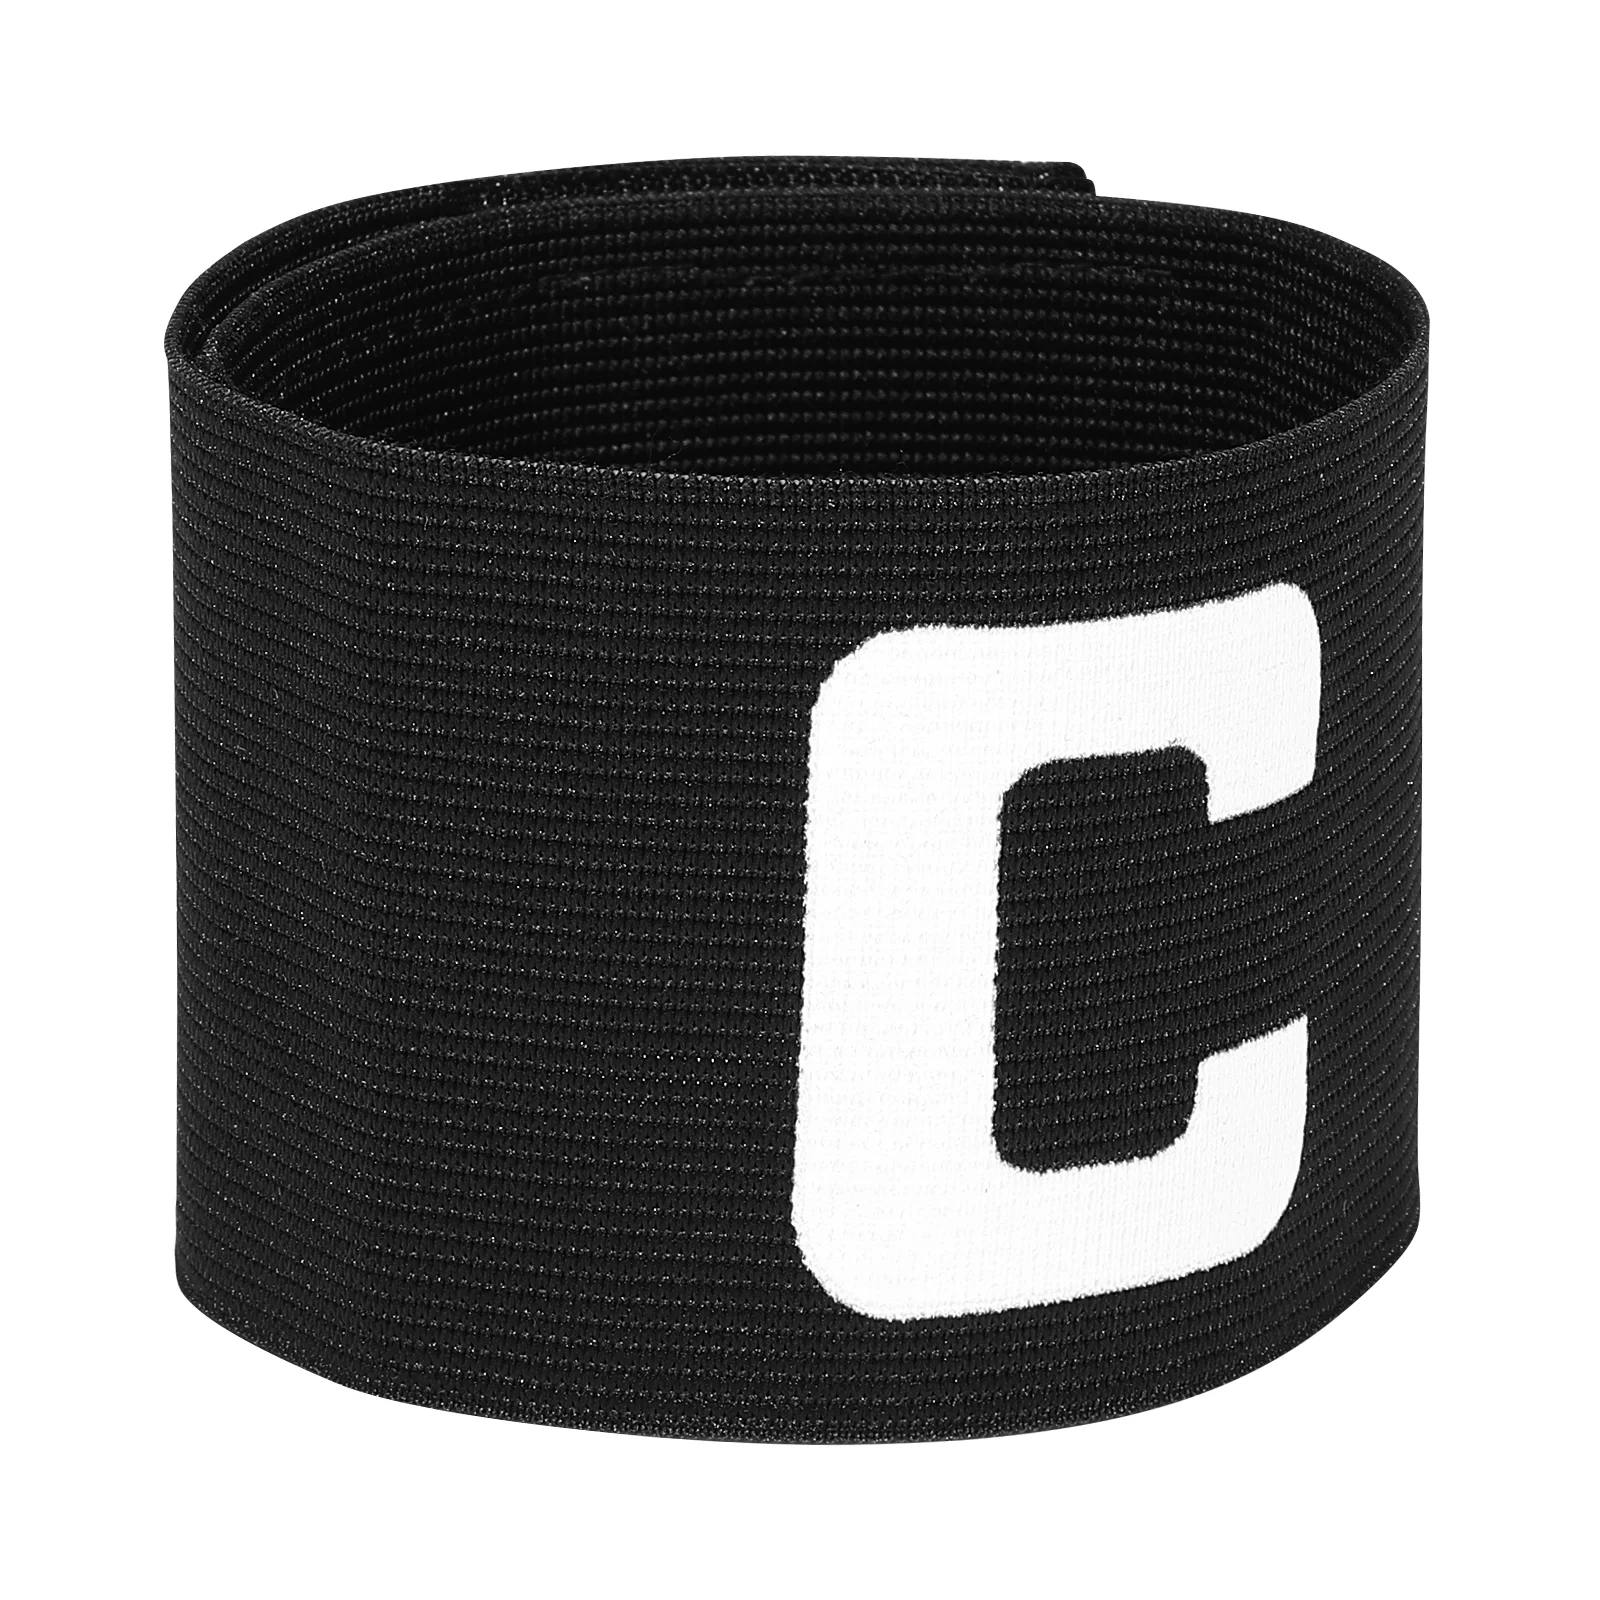 

Captain Armband Soccer Bands Arm Football Captains Band Armbands Softball Youth Adjustable Accessories Sports Drop Anti Exercise